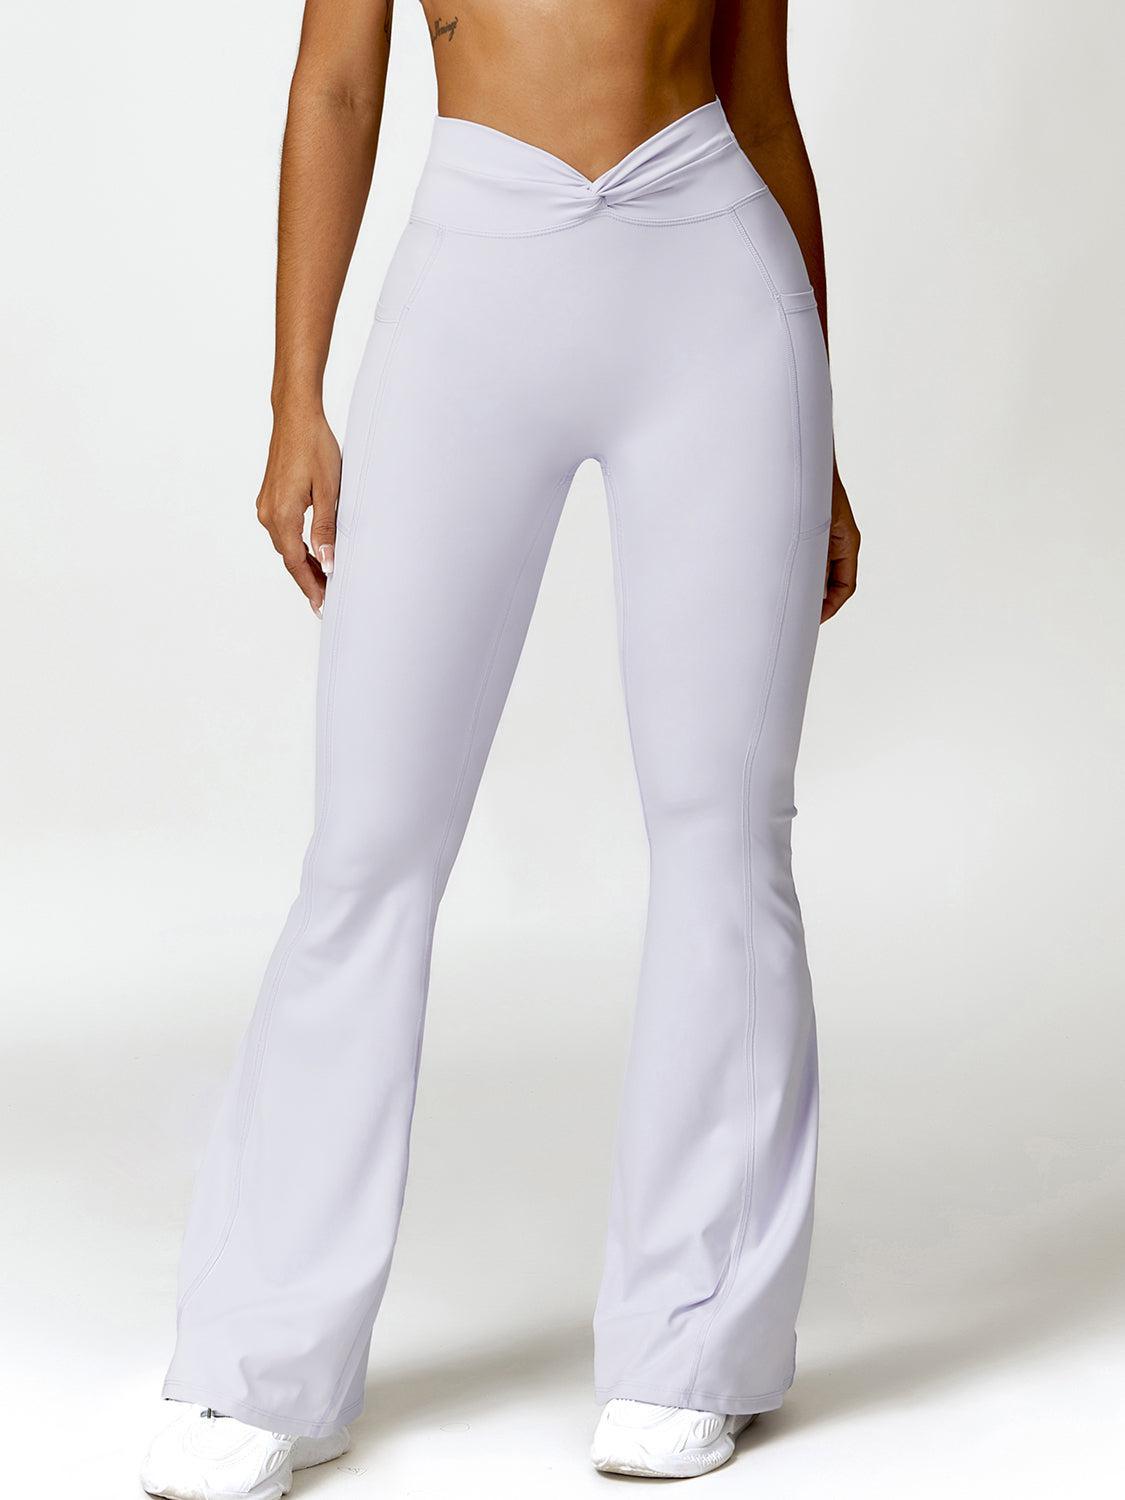 a woman in white pants is posing for a picture